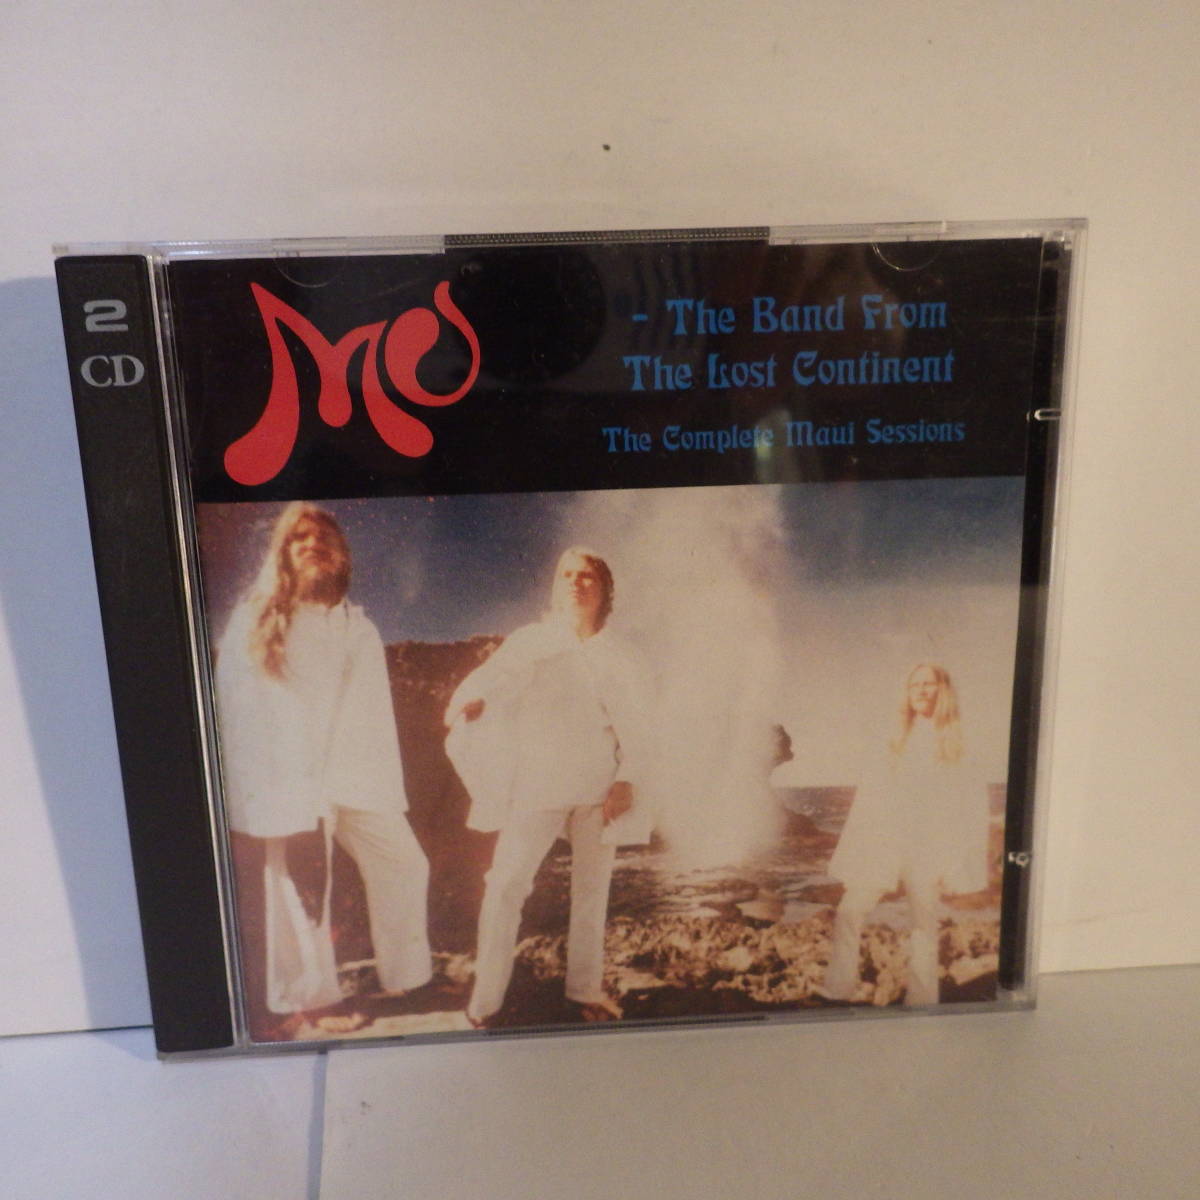 【2CD】MU The Band From The Lost Continent complete maui sessions【中古品】サイケ_画像1